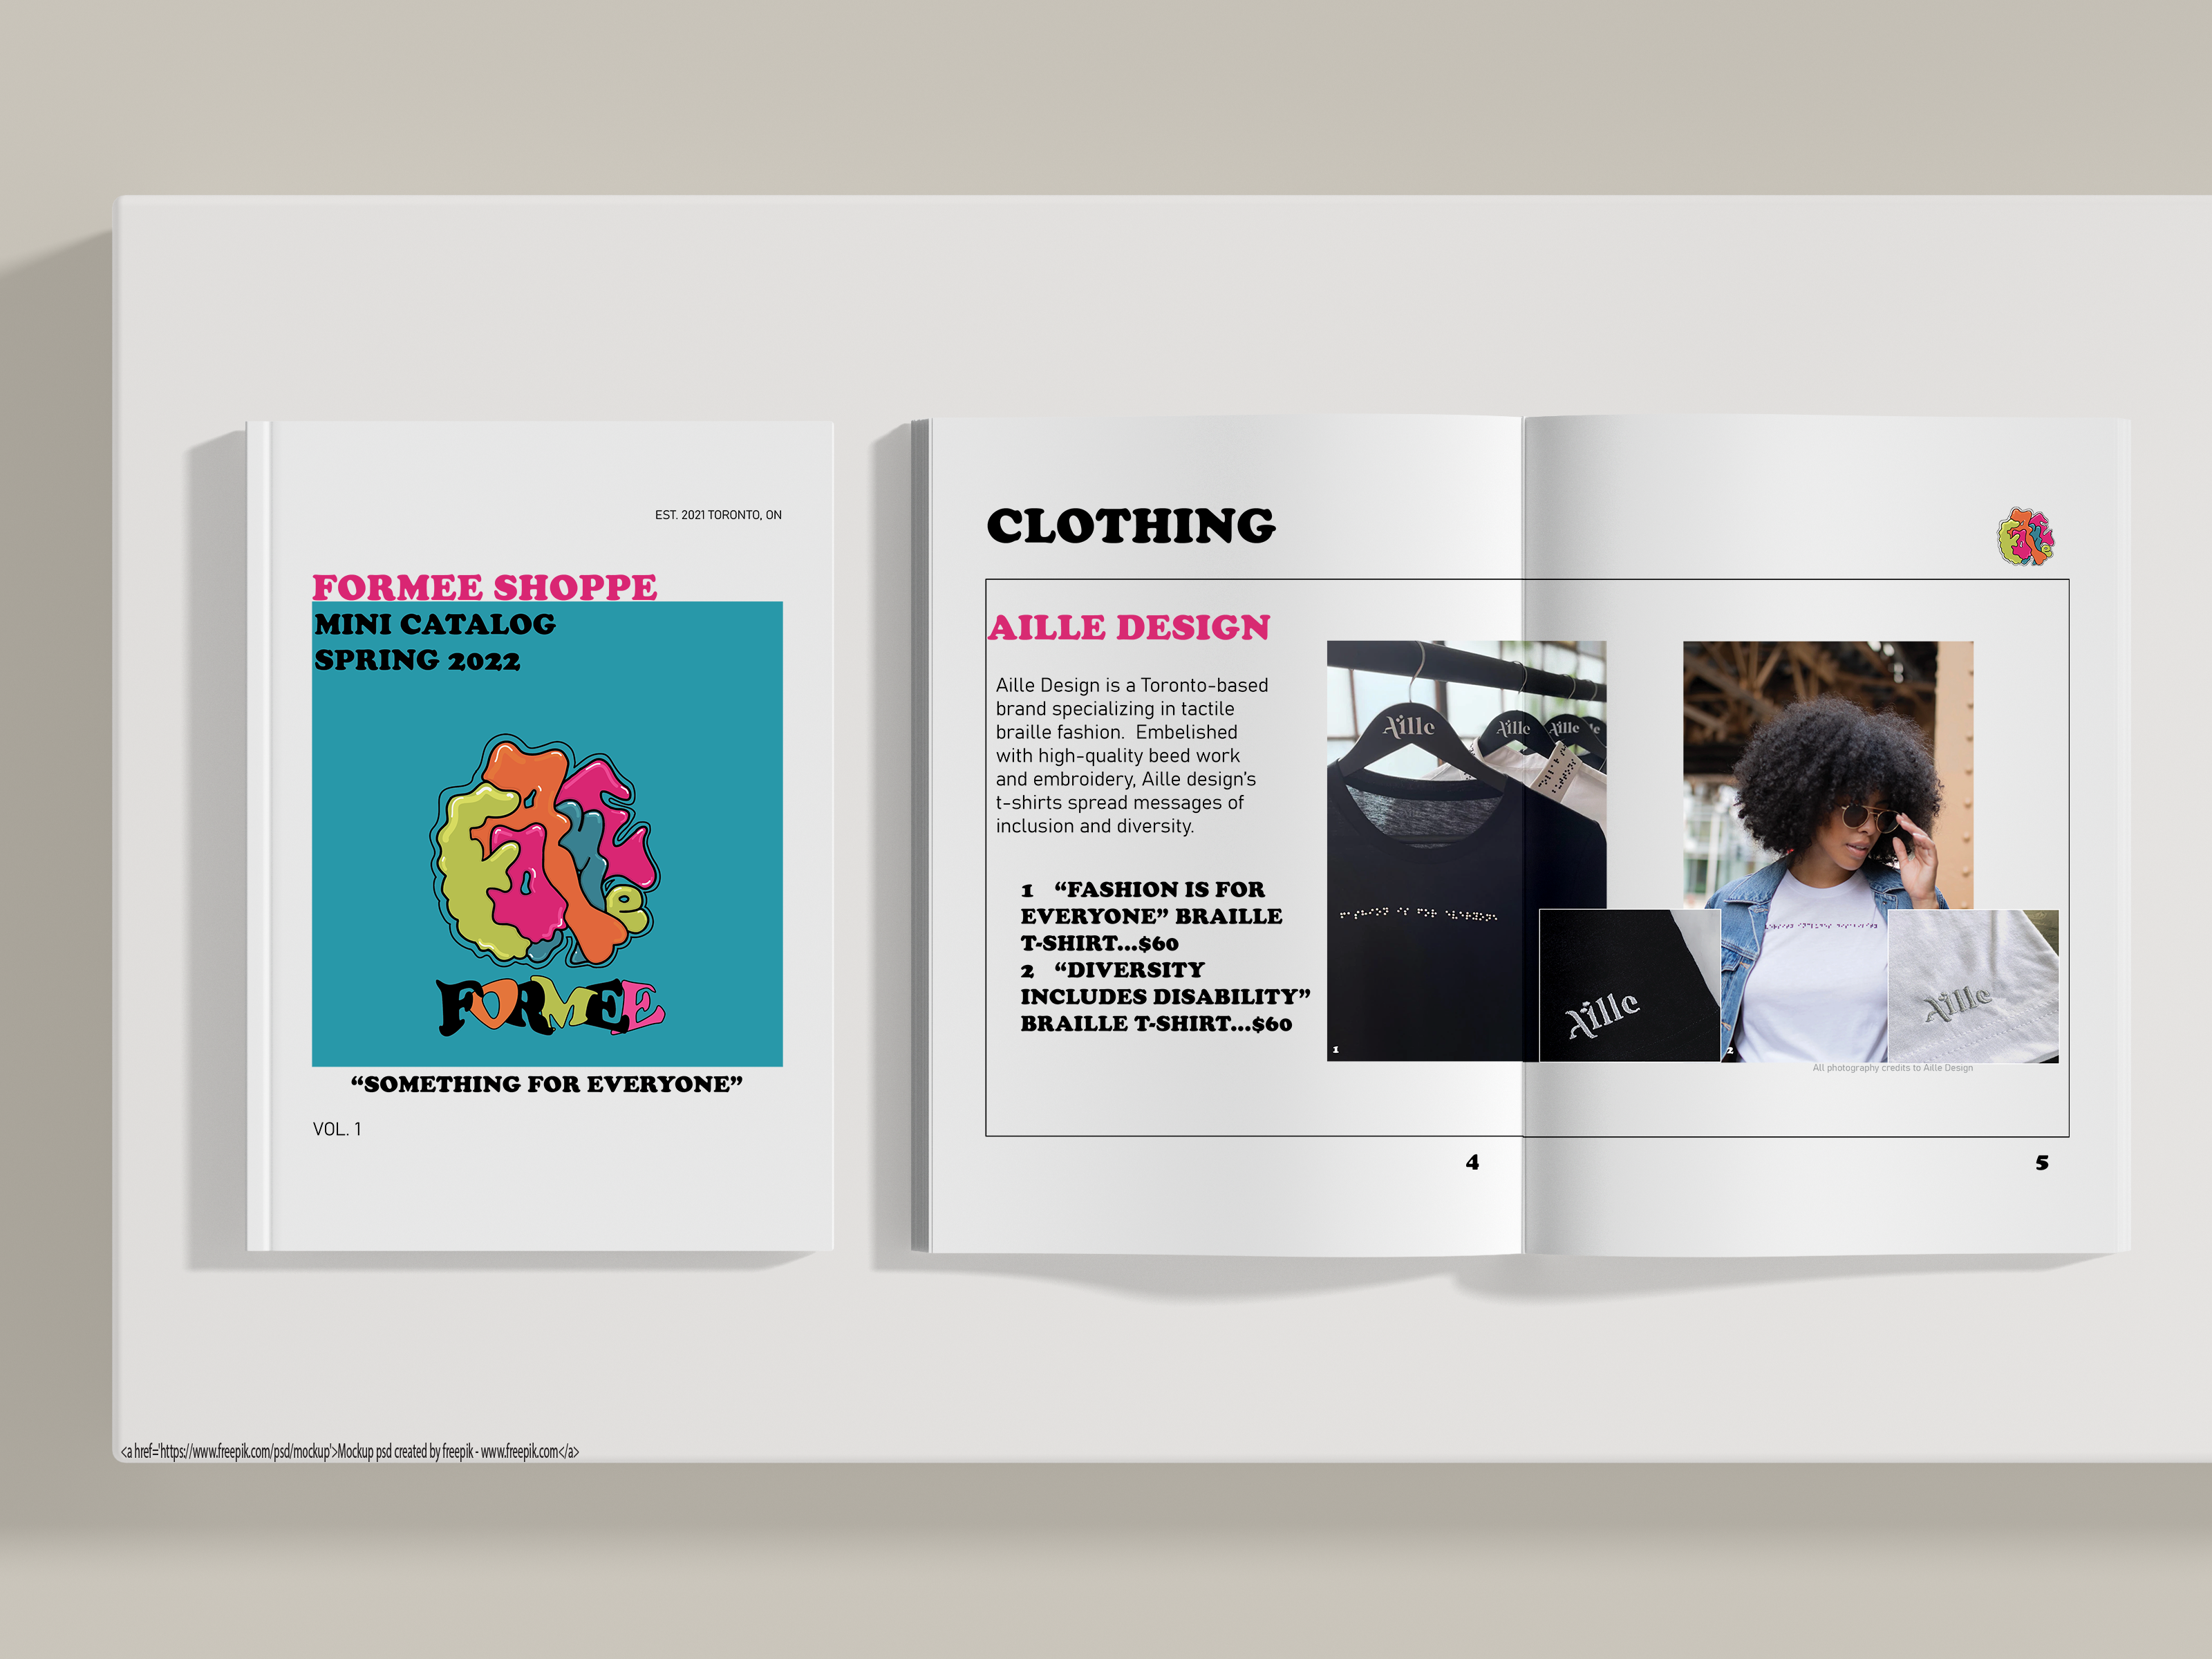 Formee Catalog Mock-up featuring Aille Design